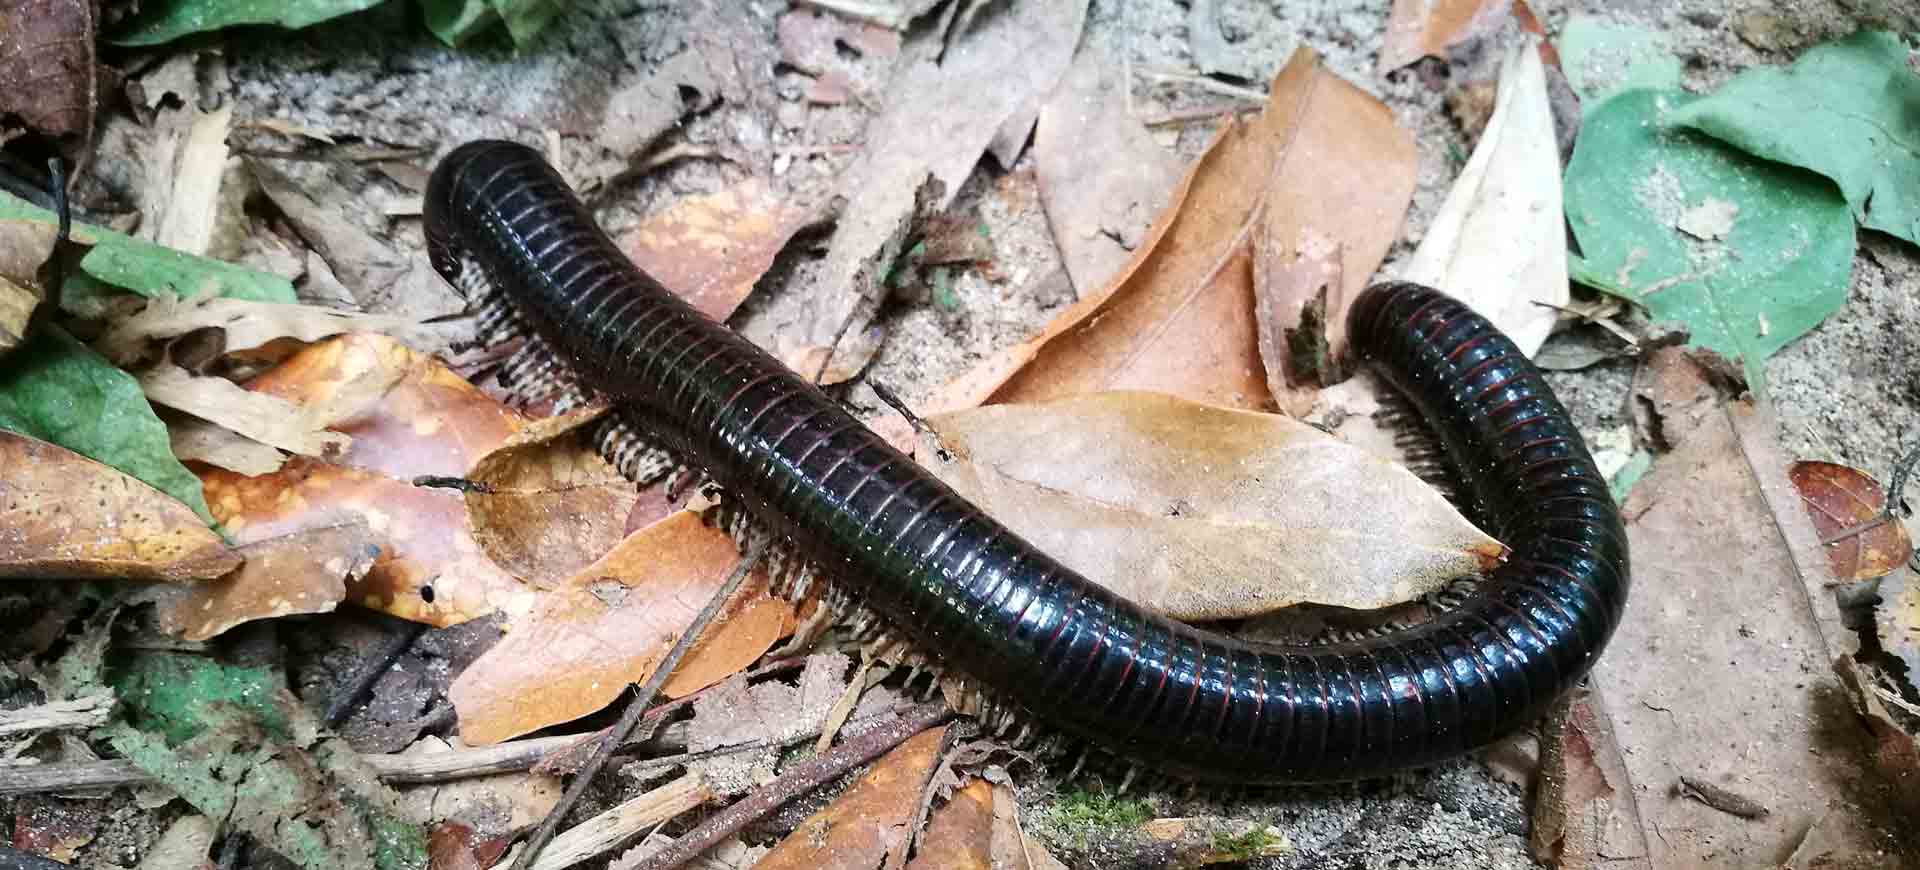 millipede pest control normal heights